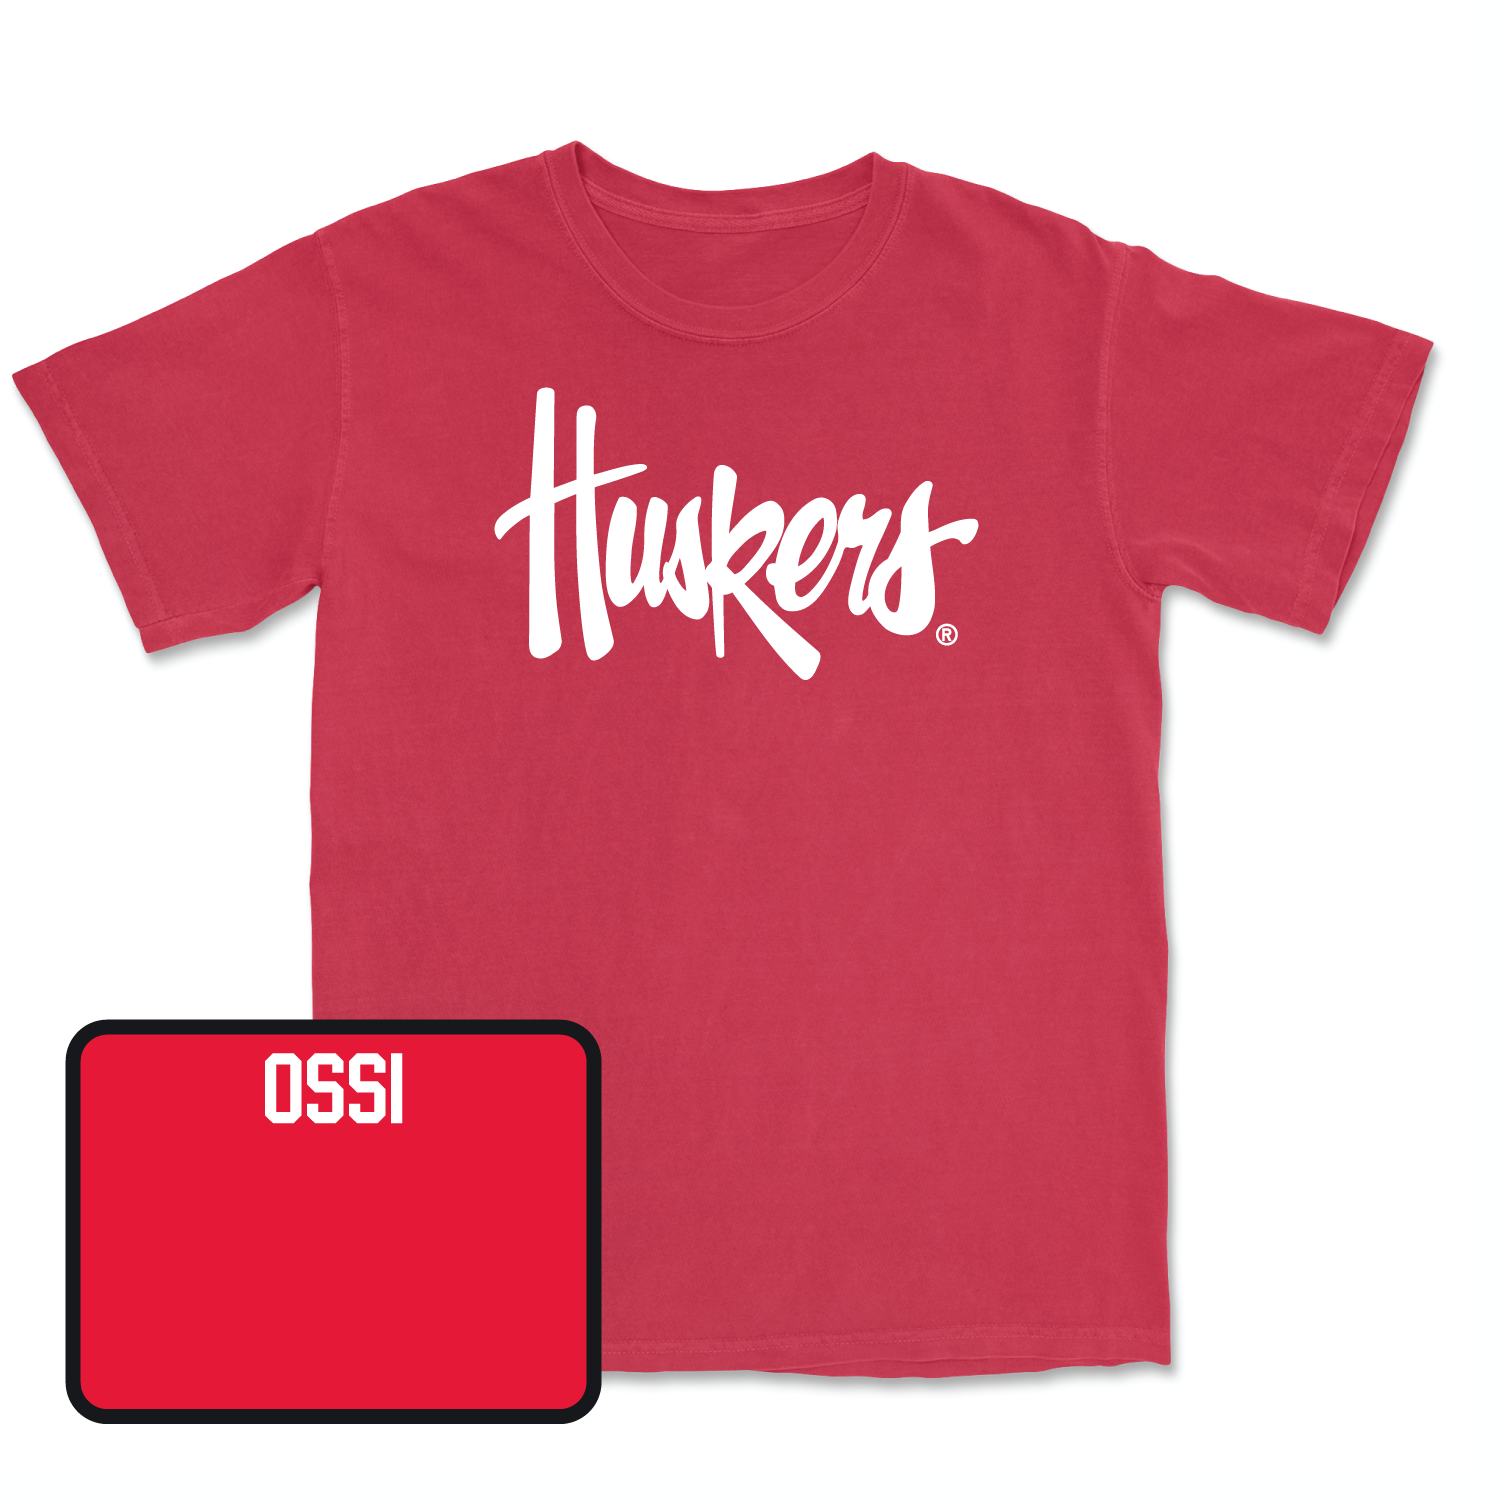 Red Women's Rifle Huskers Tee X-Large / Cecelia Ossi